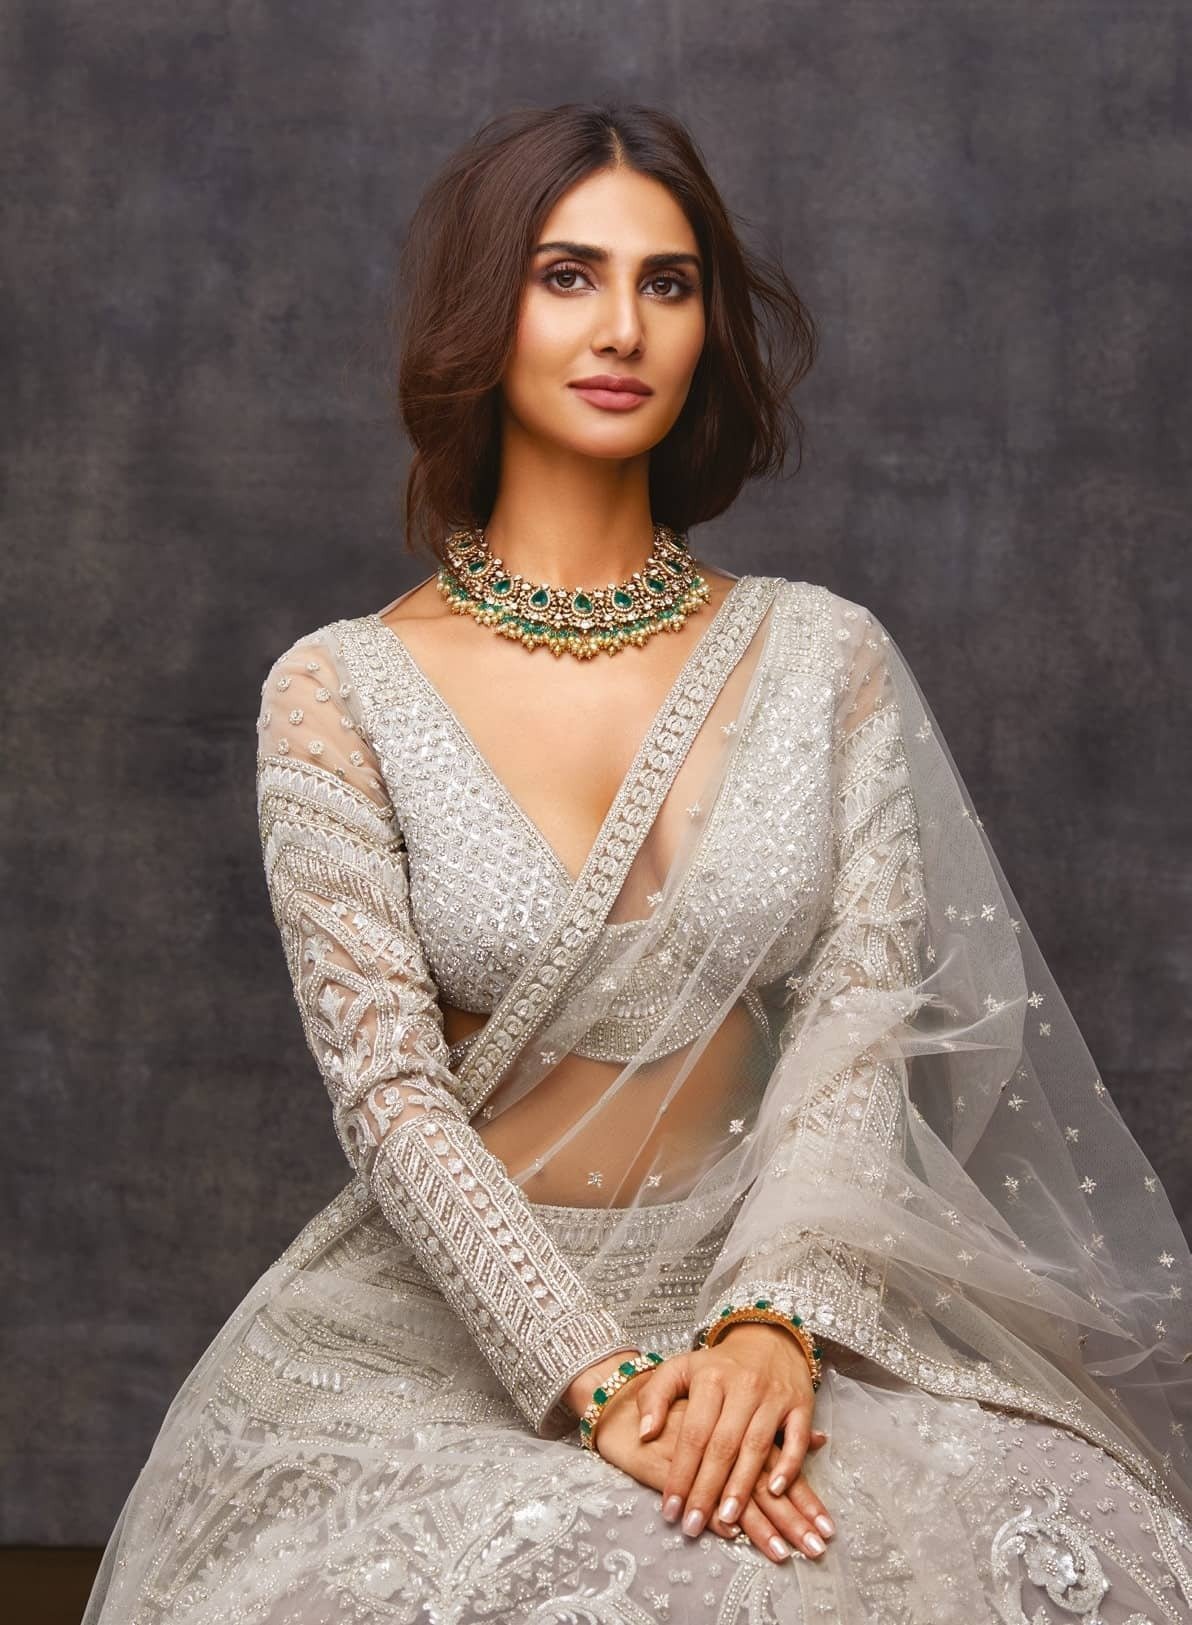 Vaani Kapoor For Brides Today March 2020 Photoshoot | Picture 1729628